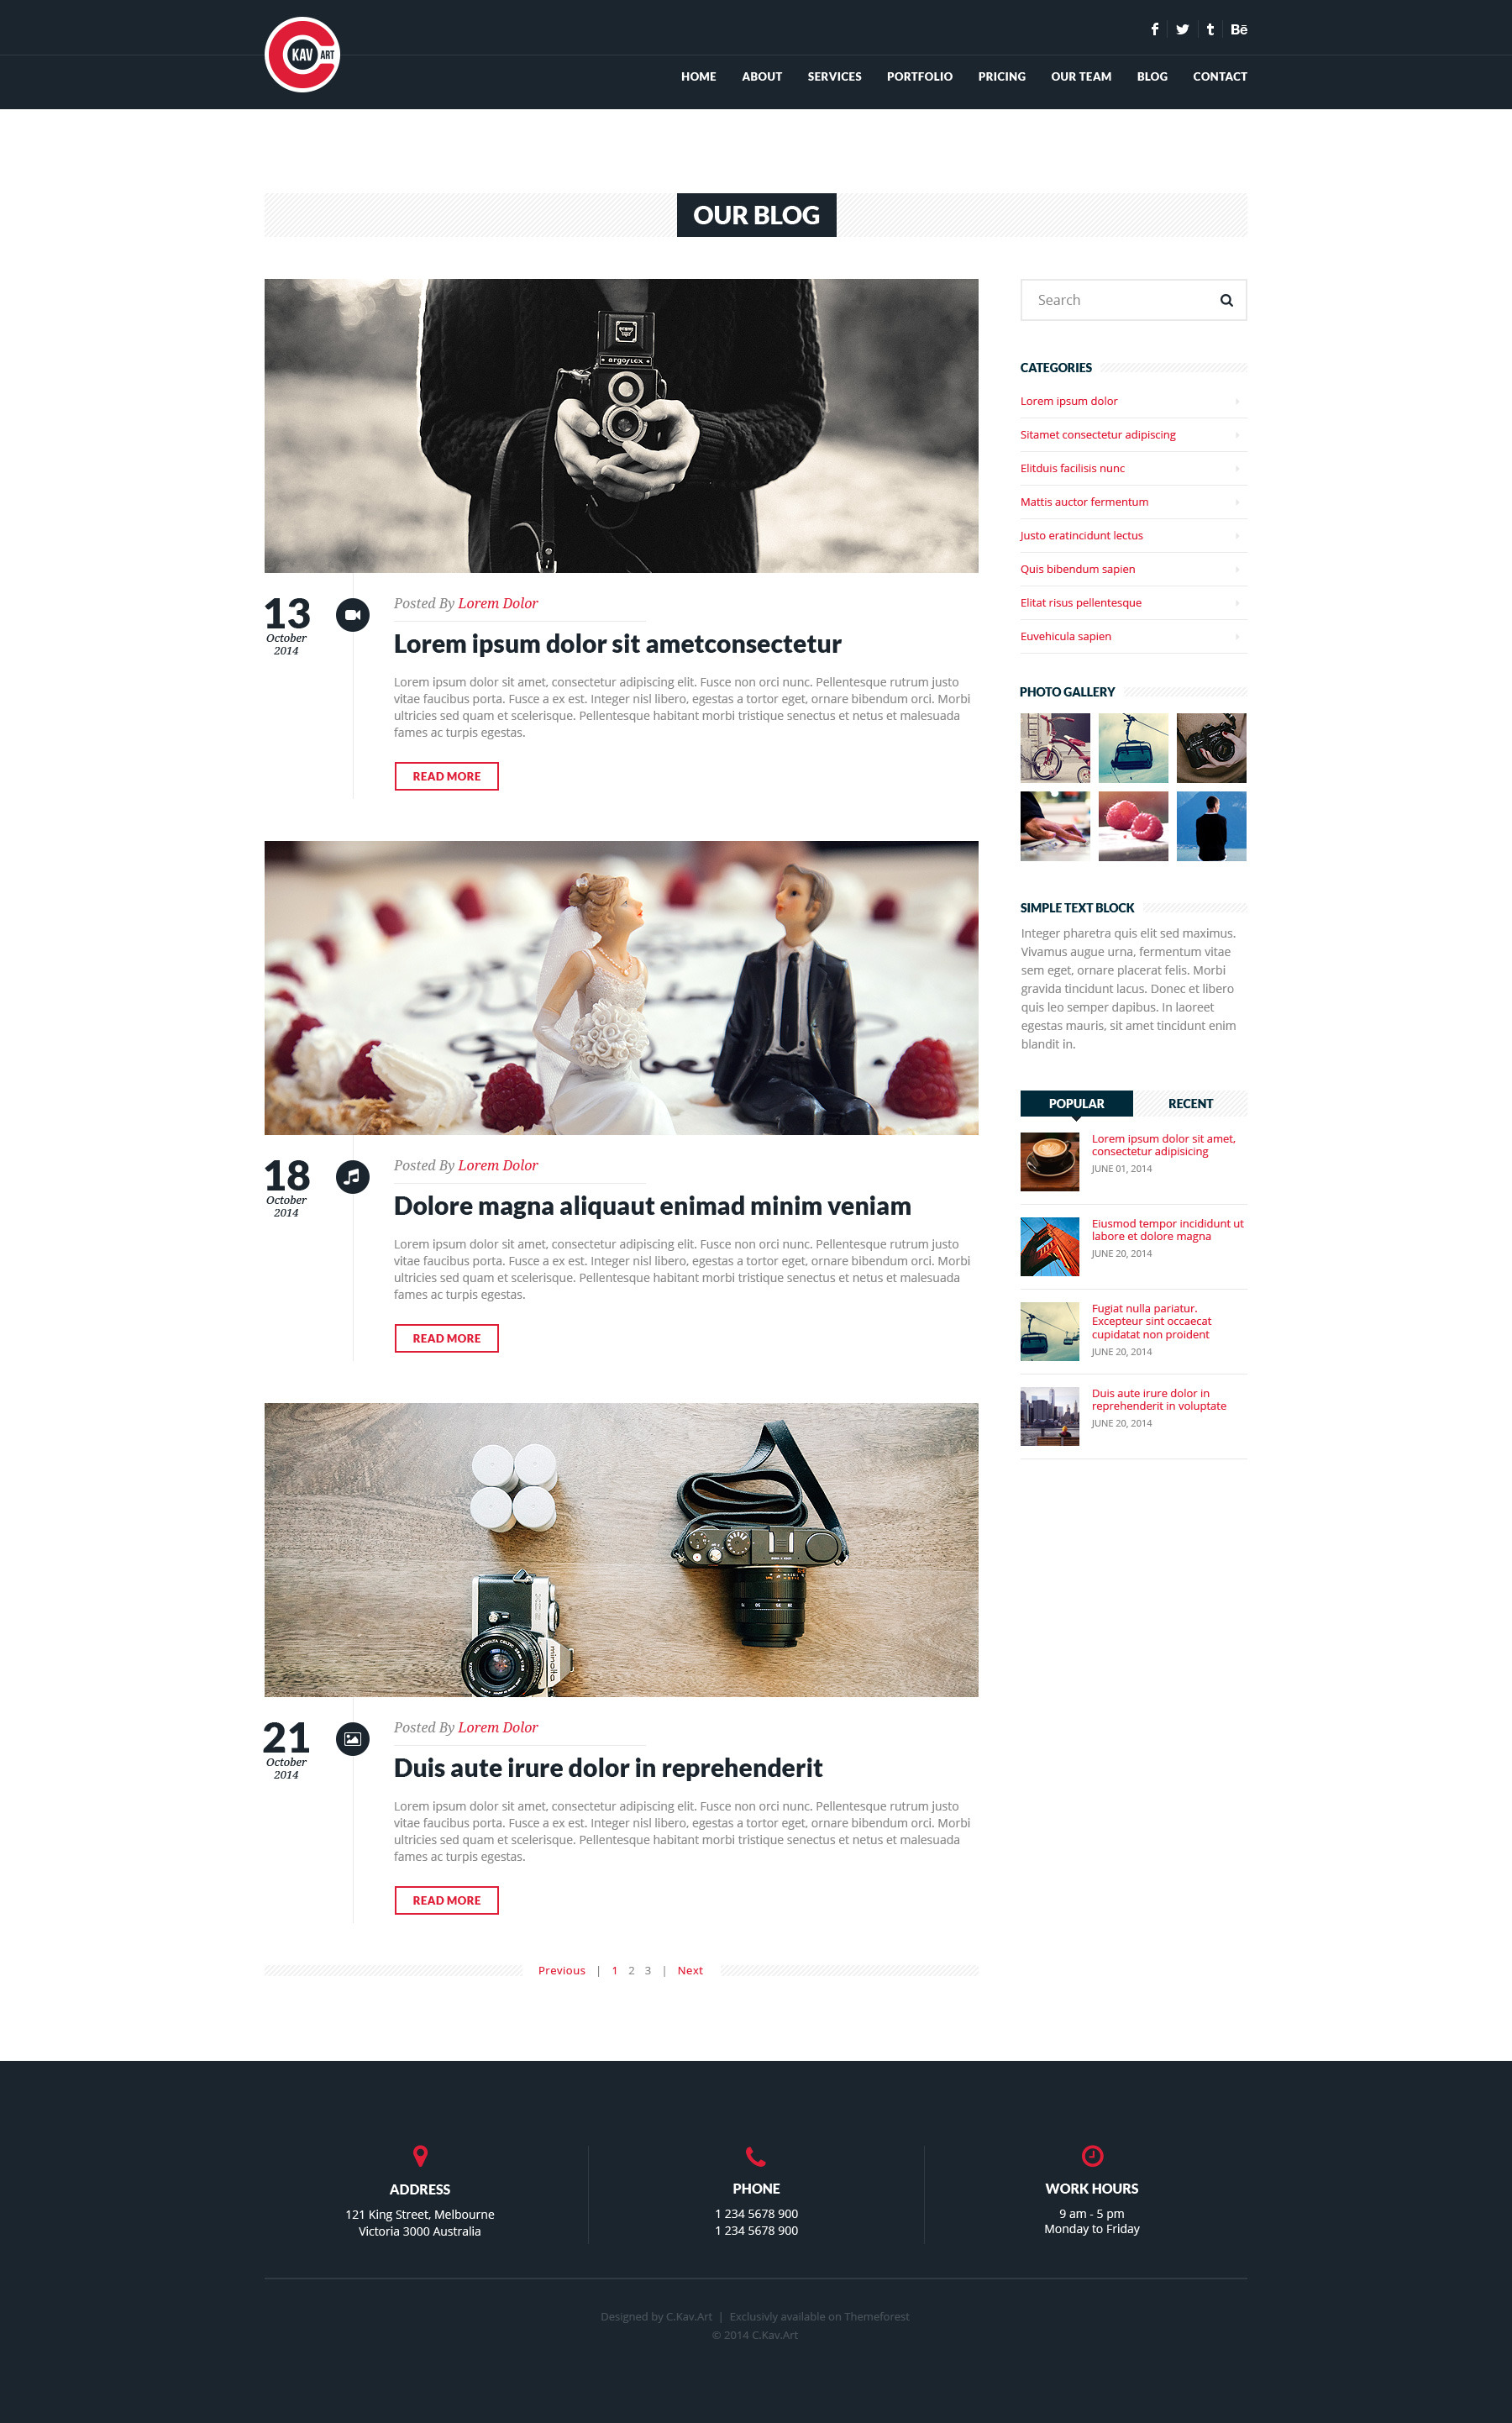 C.Kav - Opus One Page PSD Template